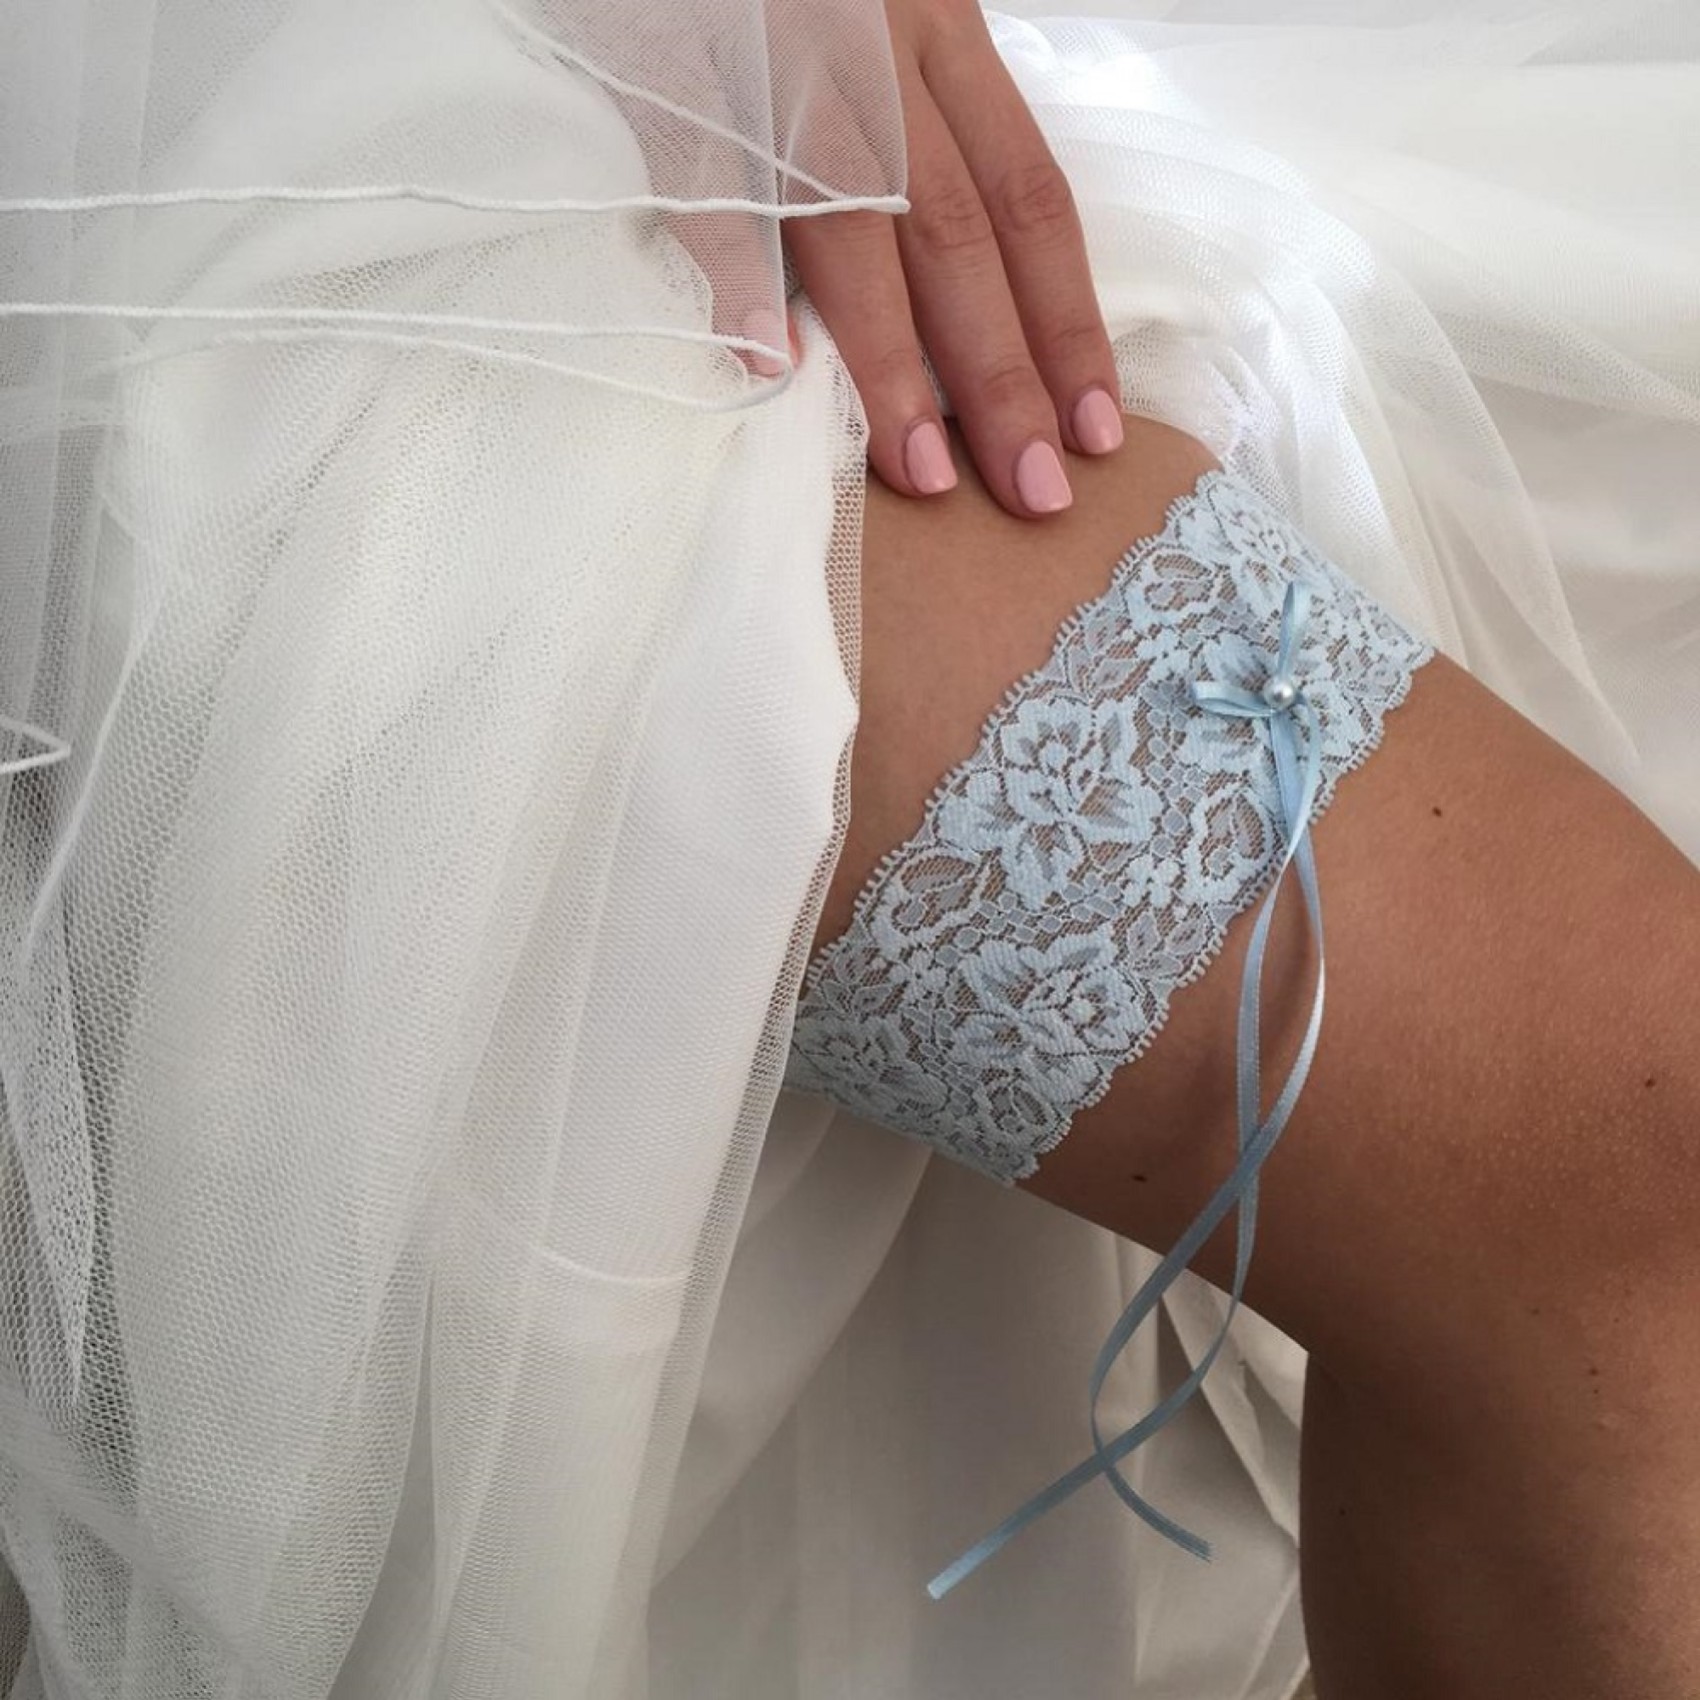 https://images.laceandfavour.com/_cache/_products_main/1700x1700/purity-blue-delicate-lace-wedding-garter-with-pearl-detail-7552.jpg